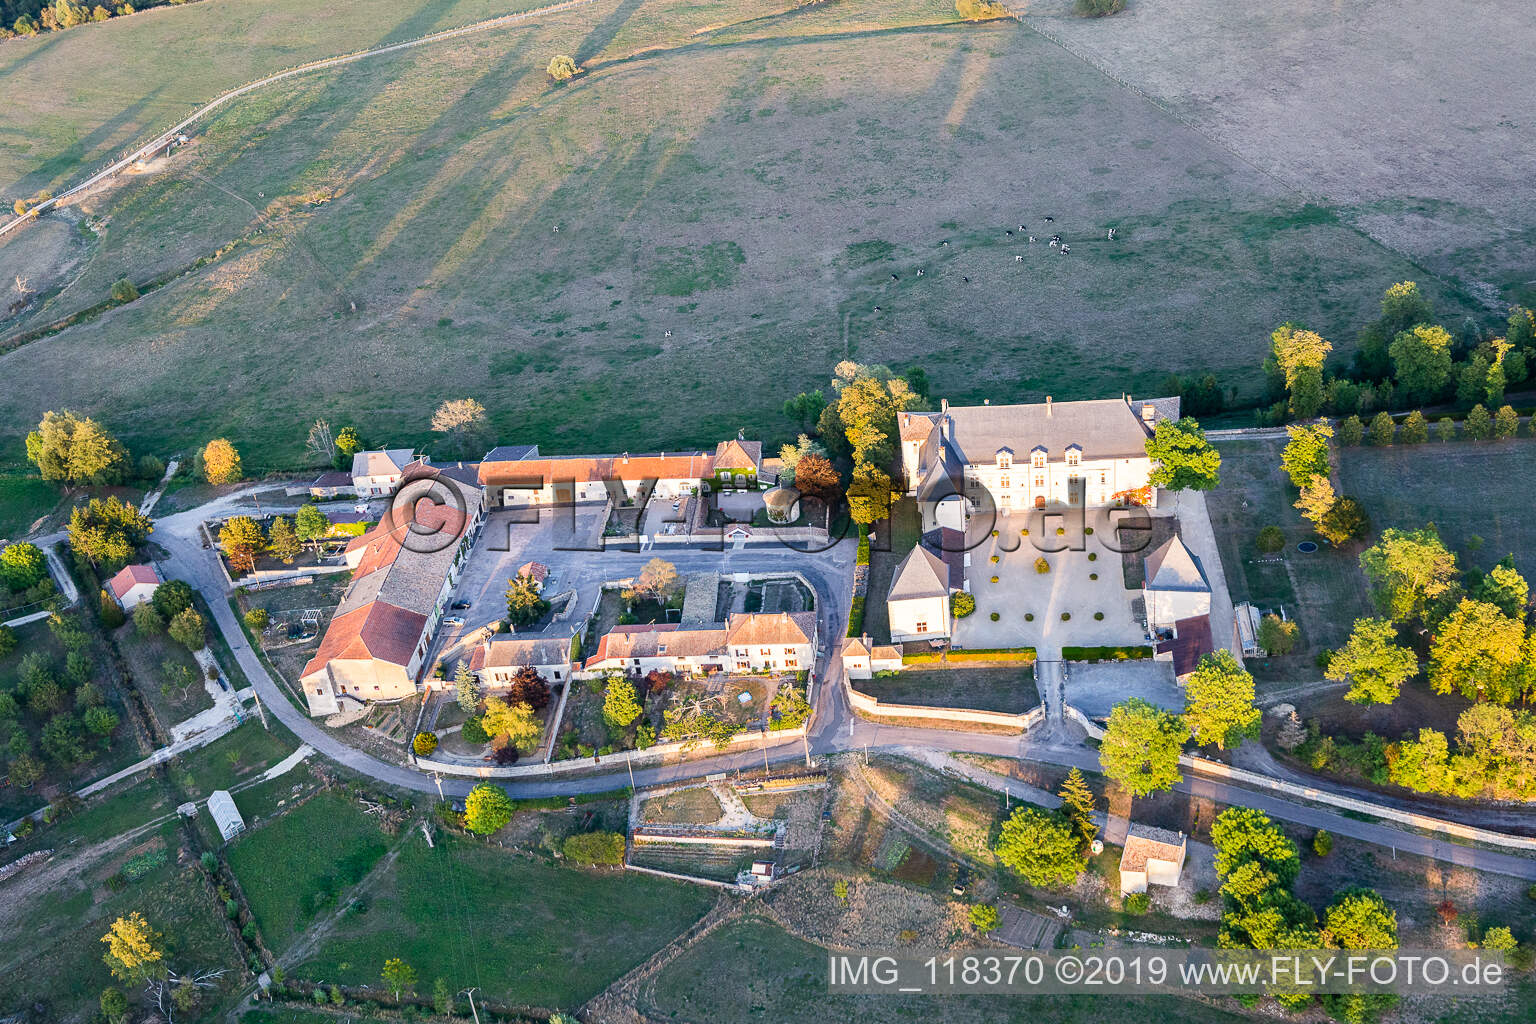 Aerial photograpy of Palace Chateau de Montbras and Hostellerie de L'Isle en Bray in Montbras in Grand Est, France